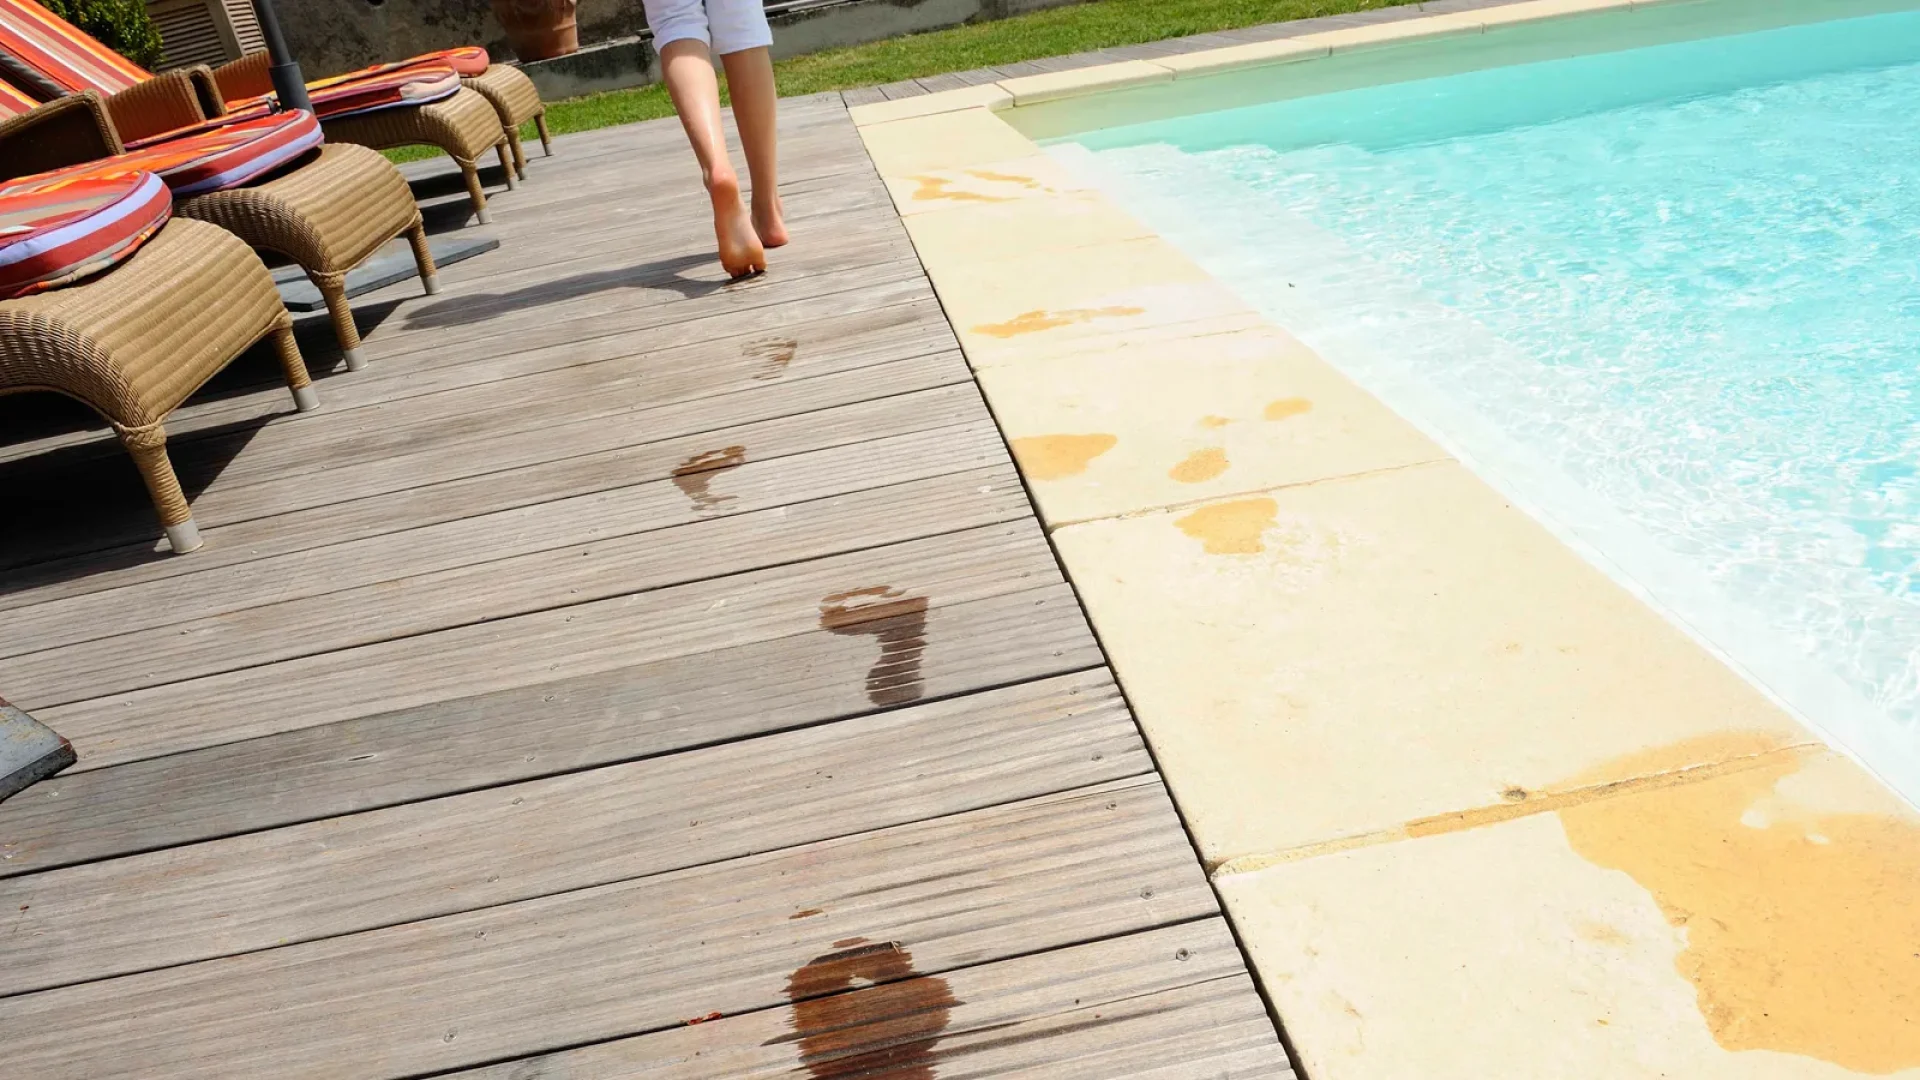 Footprints near the swimming pool at the "Château Clément" guest-house accommodation